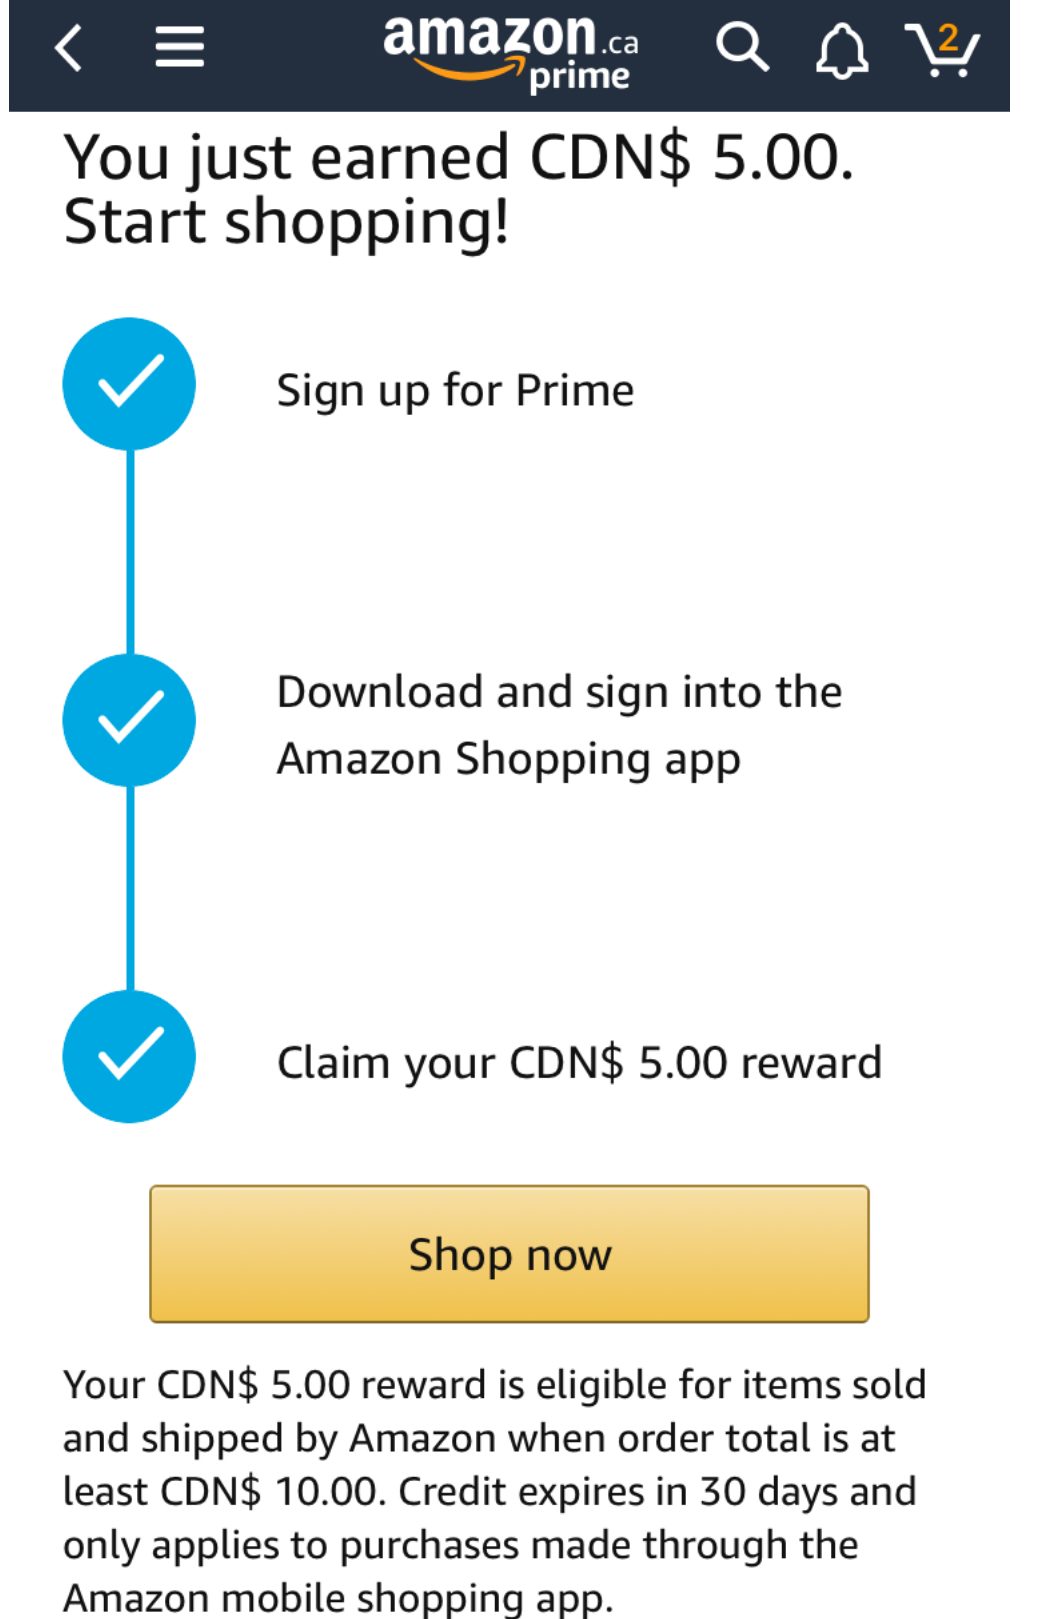 Amazon Ca Extreme Ymmv Sign Up For Prime Download And Sign Into Amazon Shopping App Then Claim 5 Reward Credit Redflagdeals Com Forums